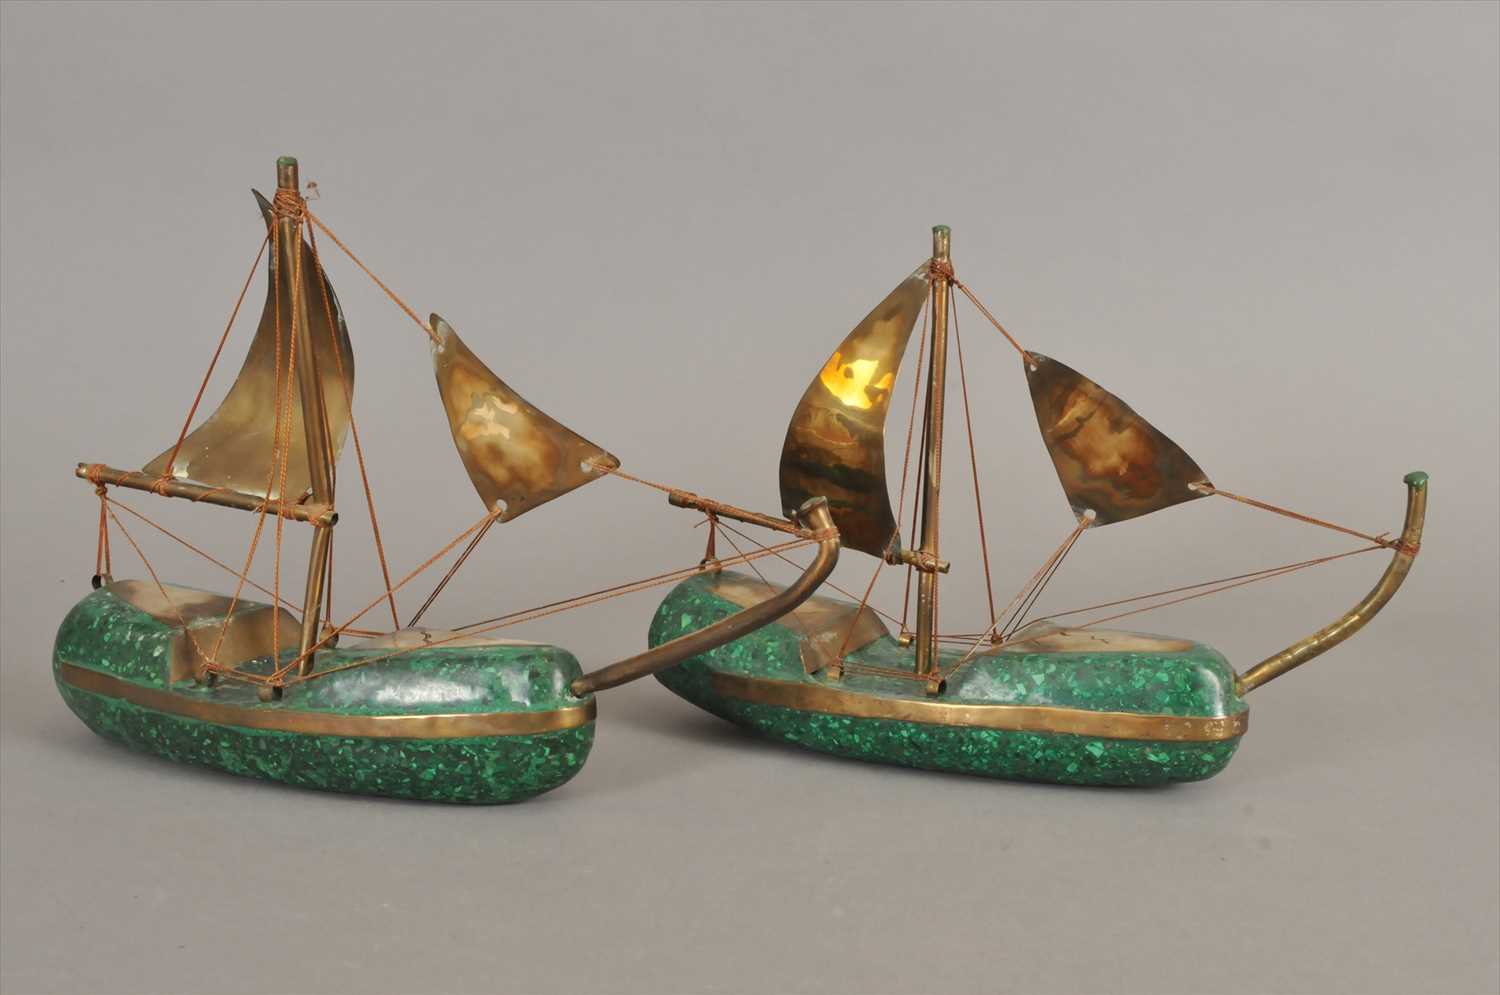 A pair of African folk art models of boats made from malachite and brass